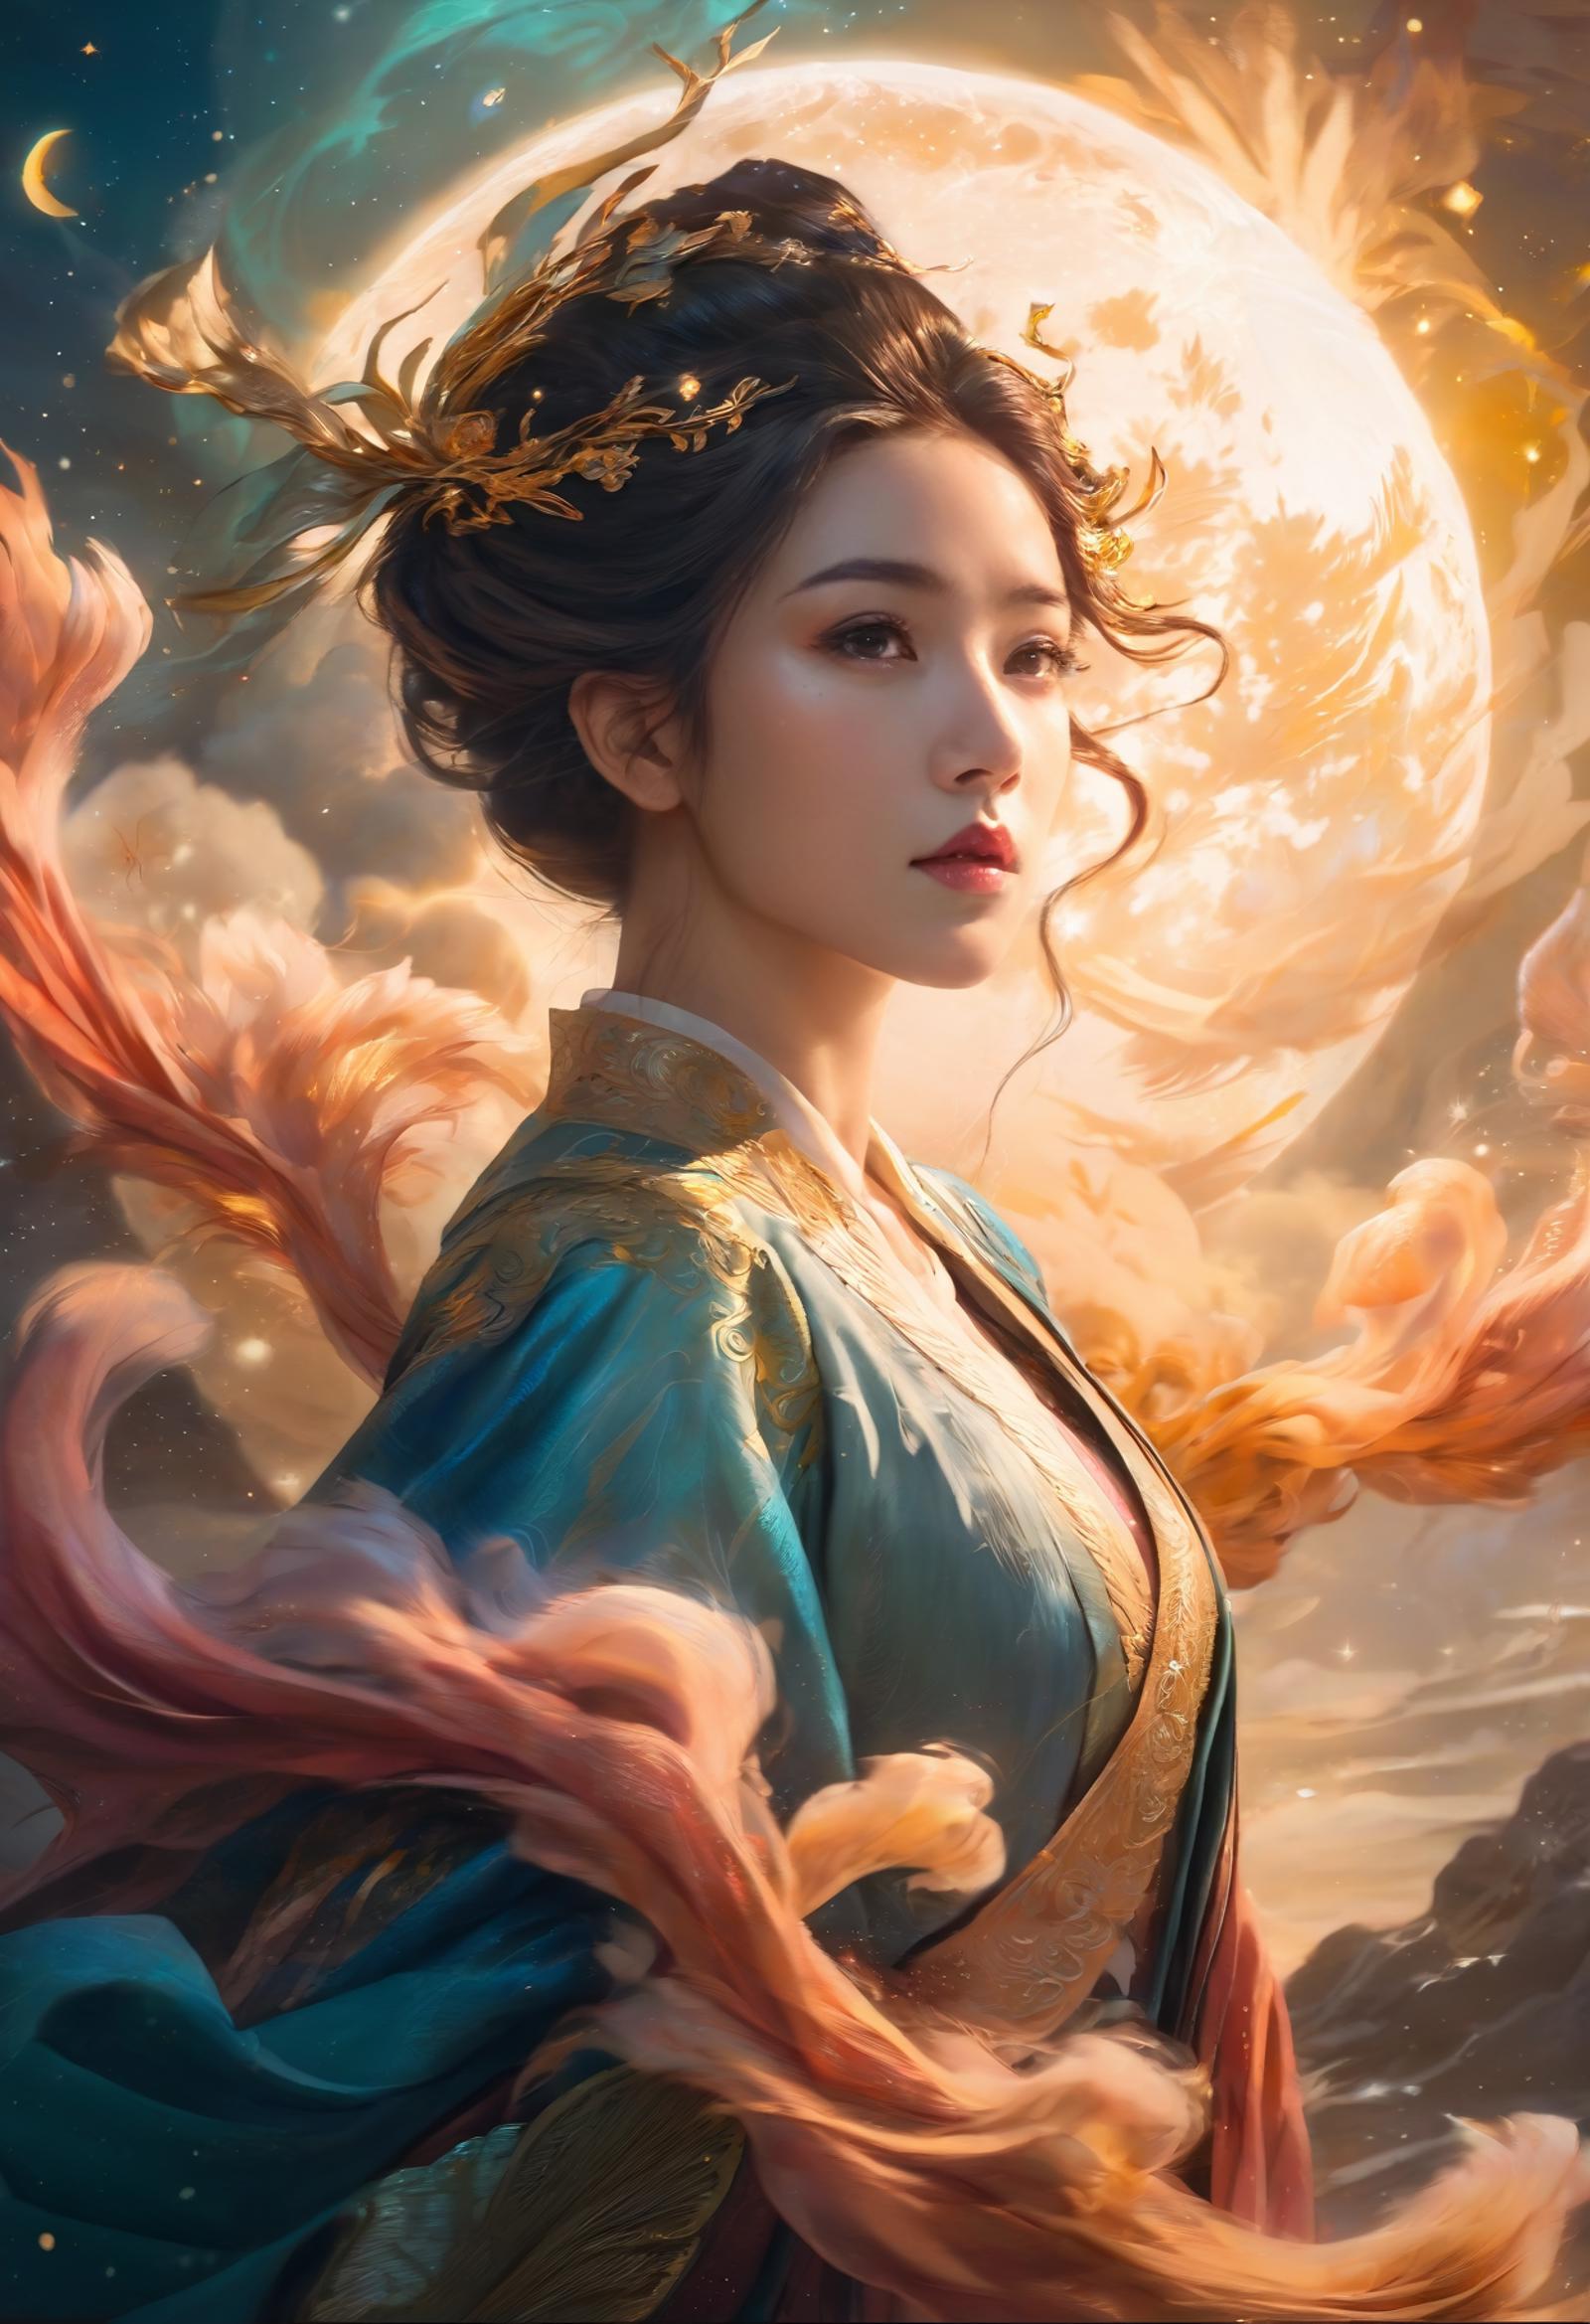 A woman in a blue robe with a flower in her hair and a moon in the background.